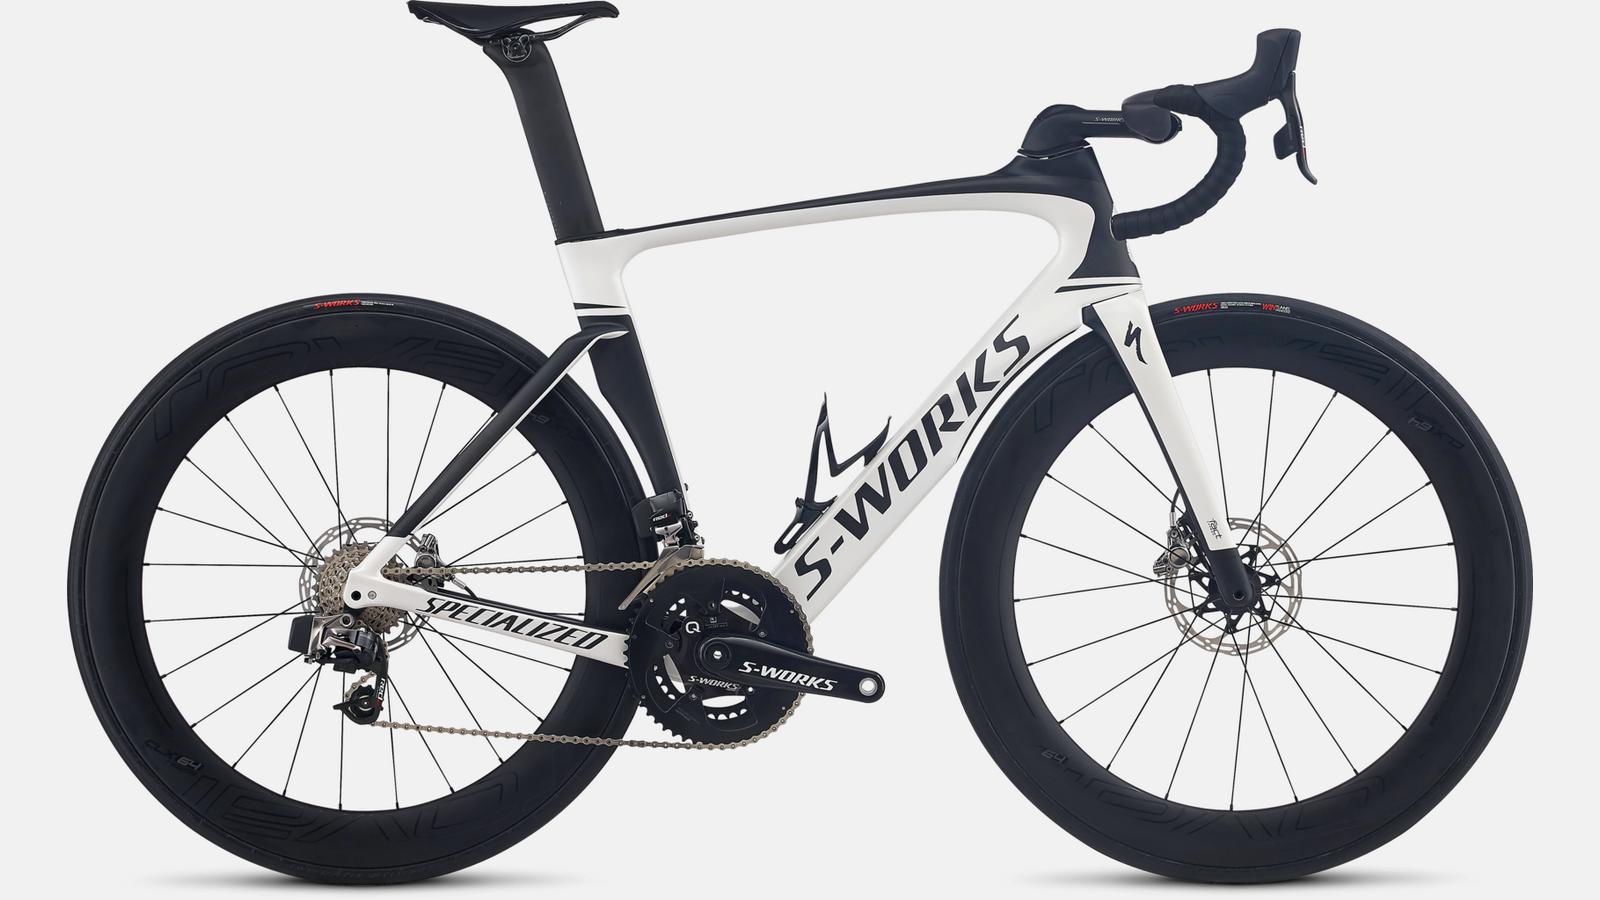 Touch-up paint for 2018 Specialized S-Works Venge ViAS Disc eTap - Gloss Metallic White